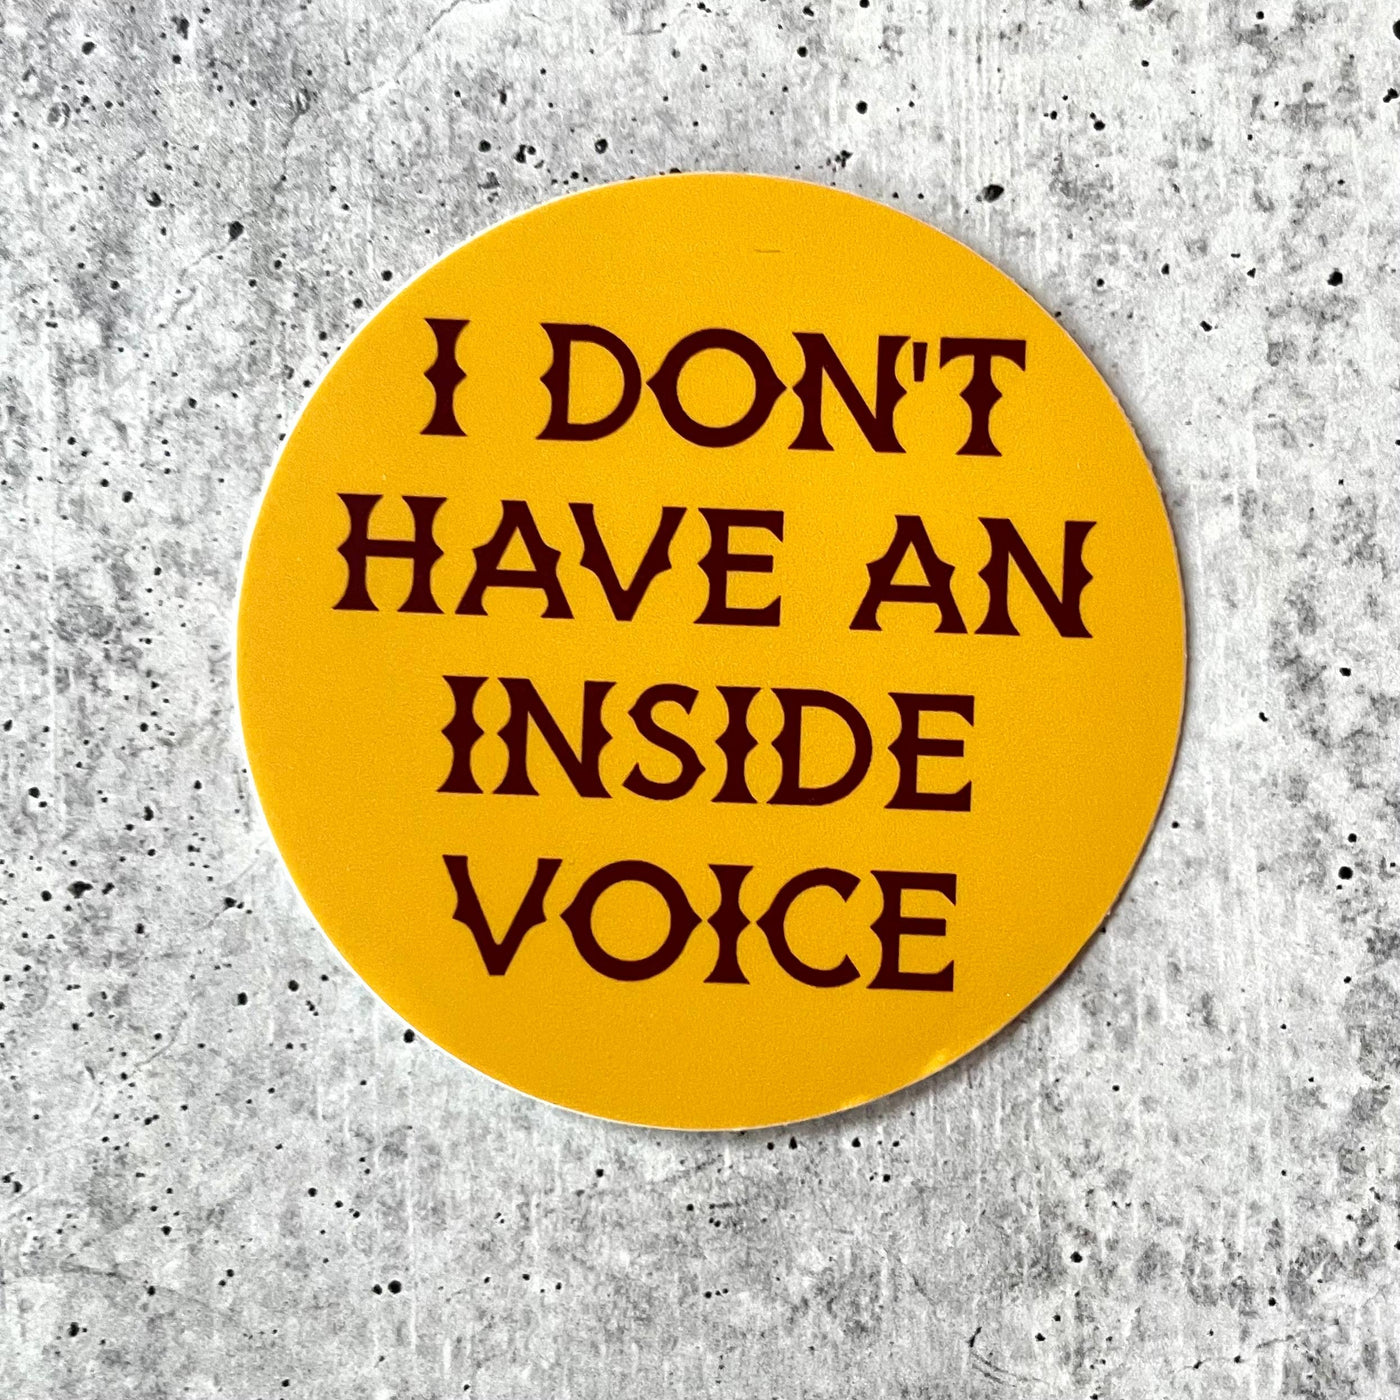 The Silver Spider - I don’t have an inside voice vintage style retro Sticker